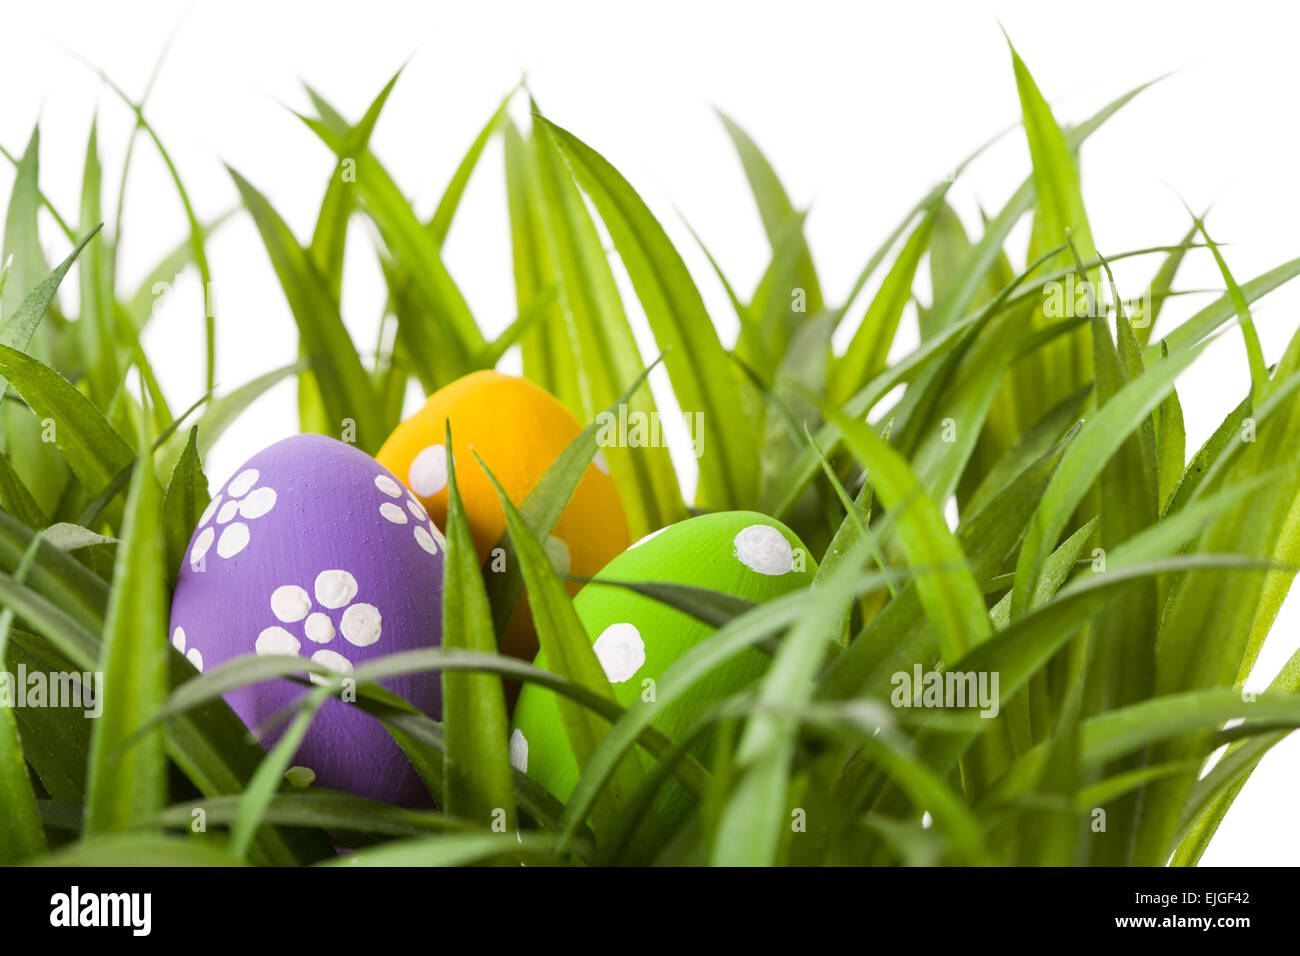 Easter Eggs with flower on Fresh Green Grass Stock Photo